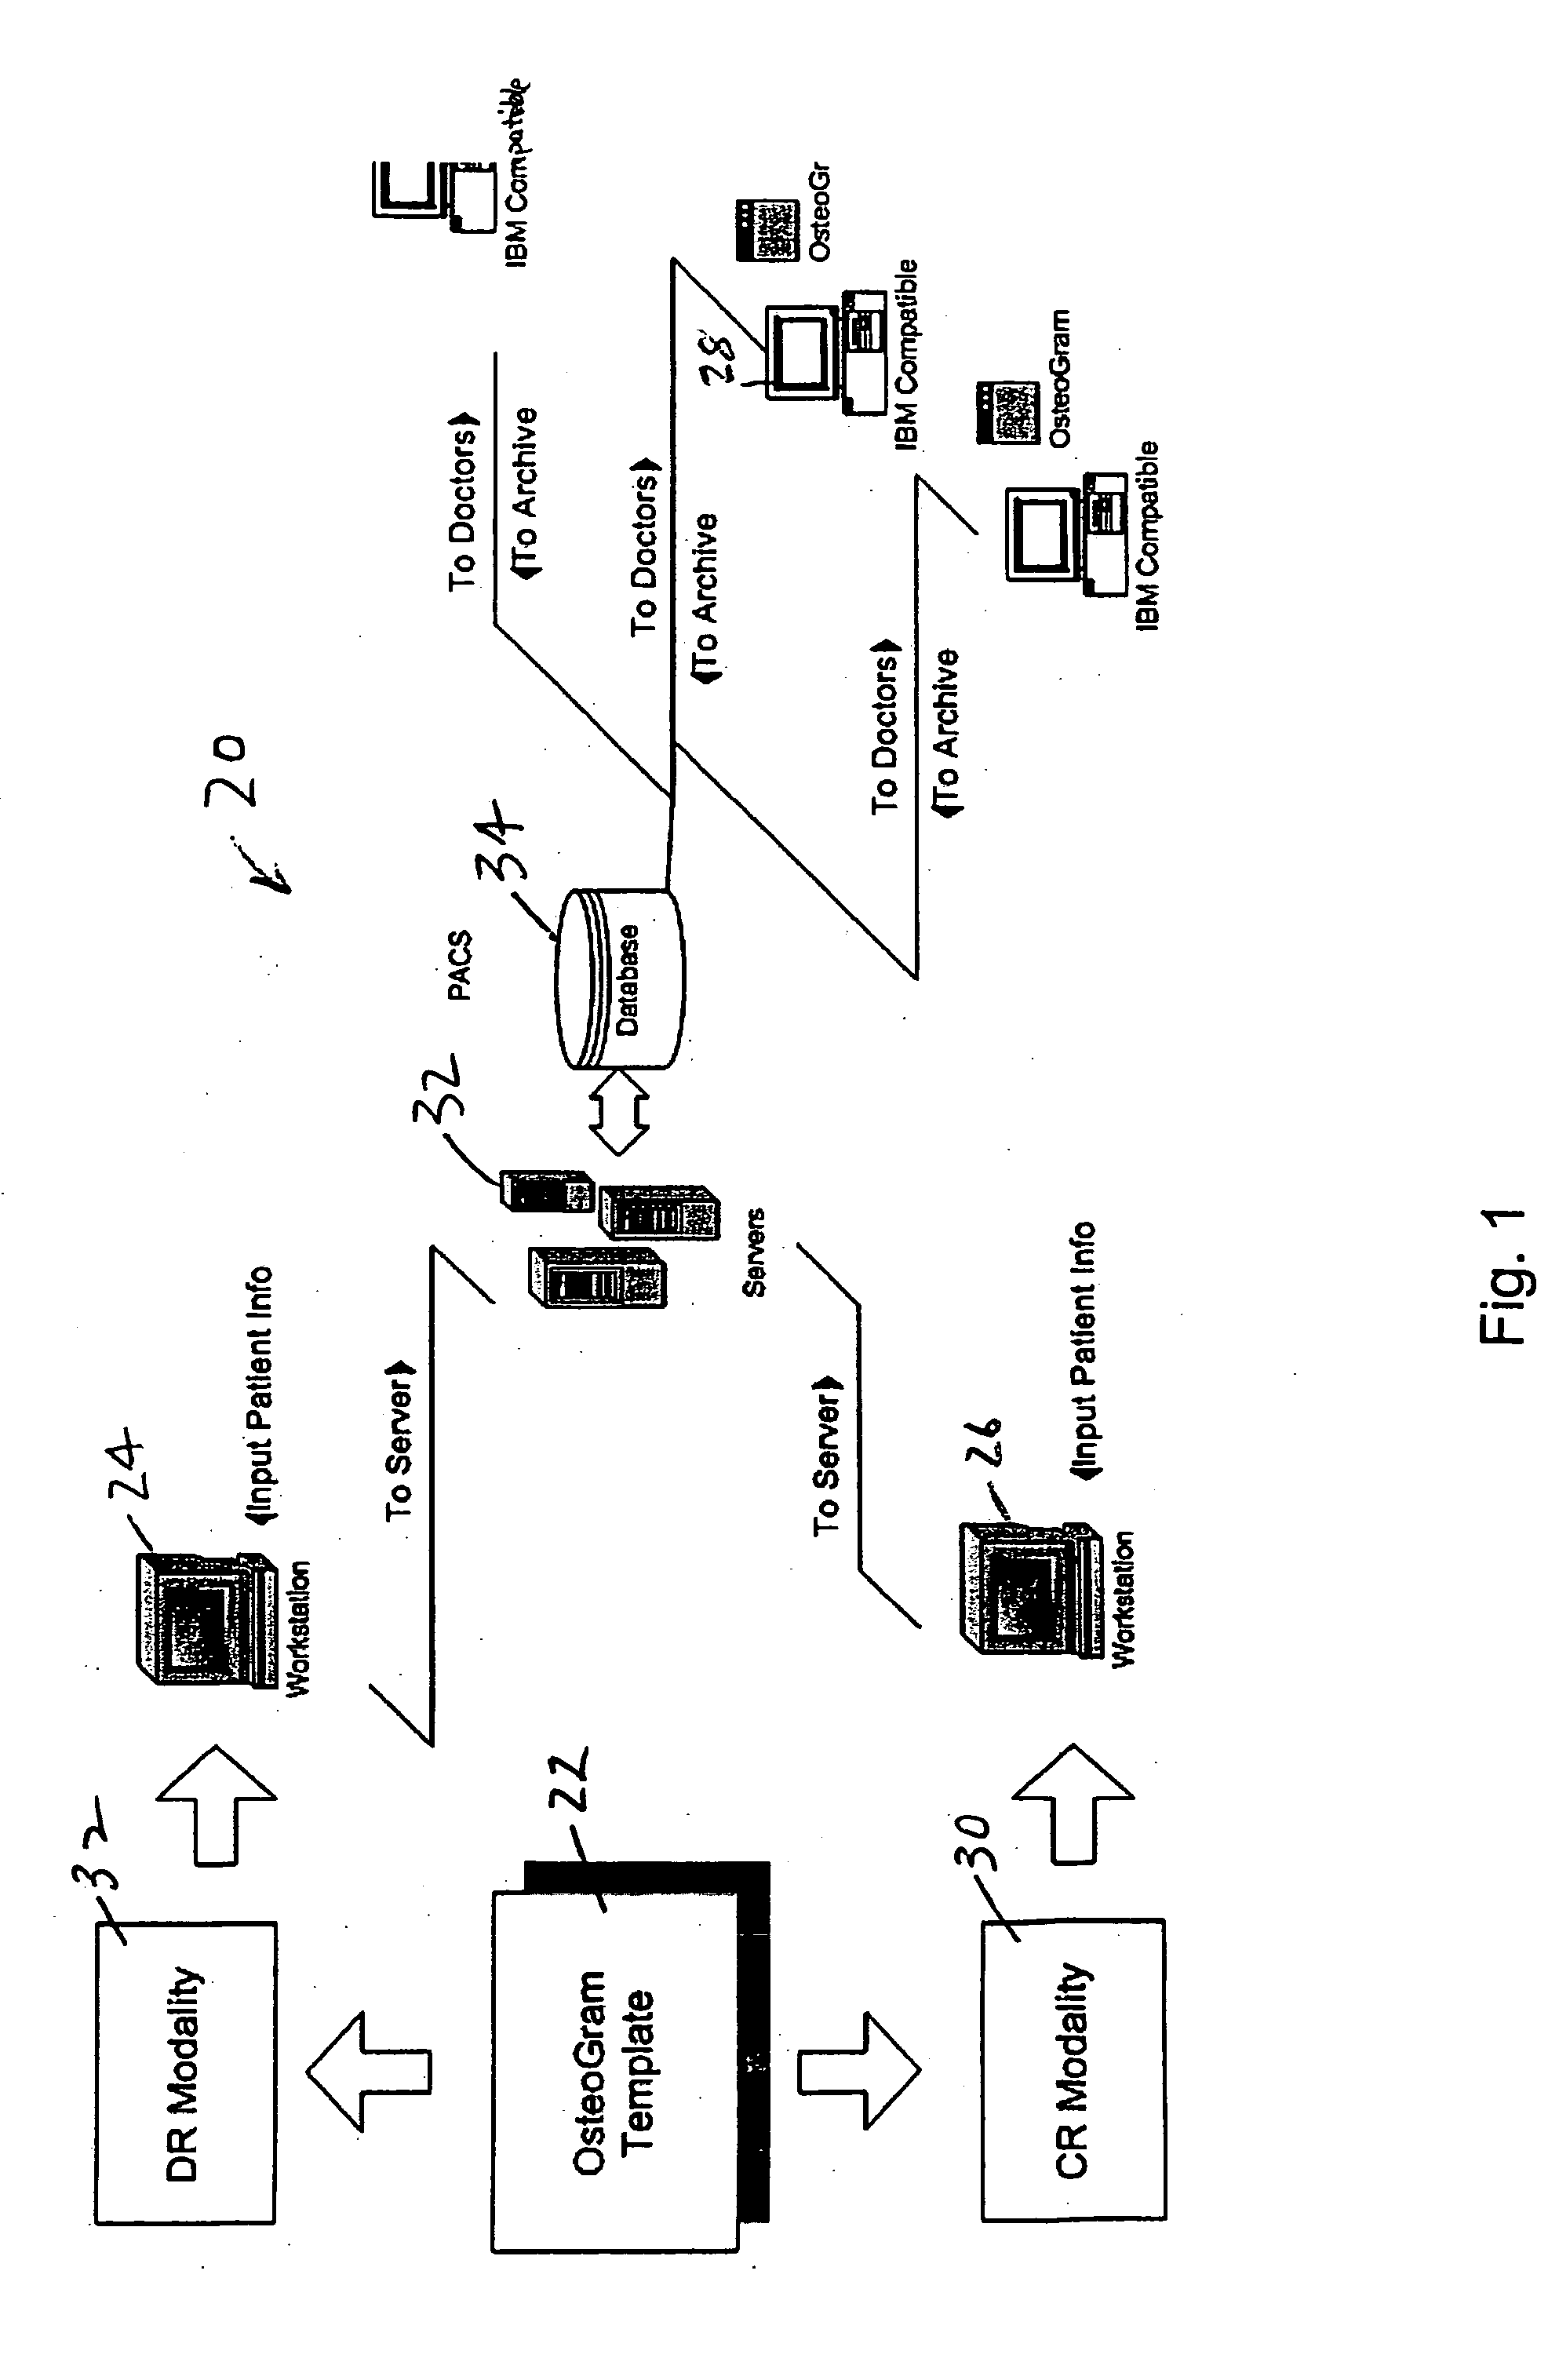 Method and system for analyzing bone conditions using DICOM compliant bone radiographic image